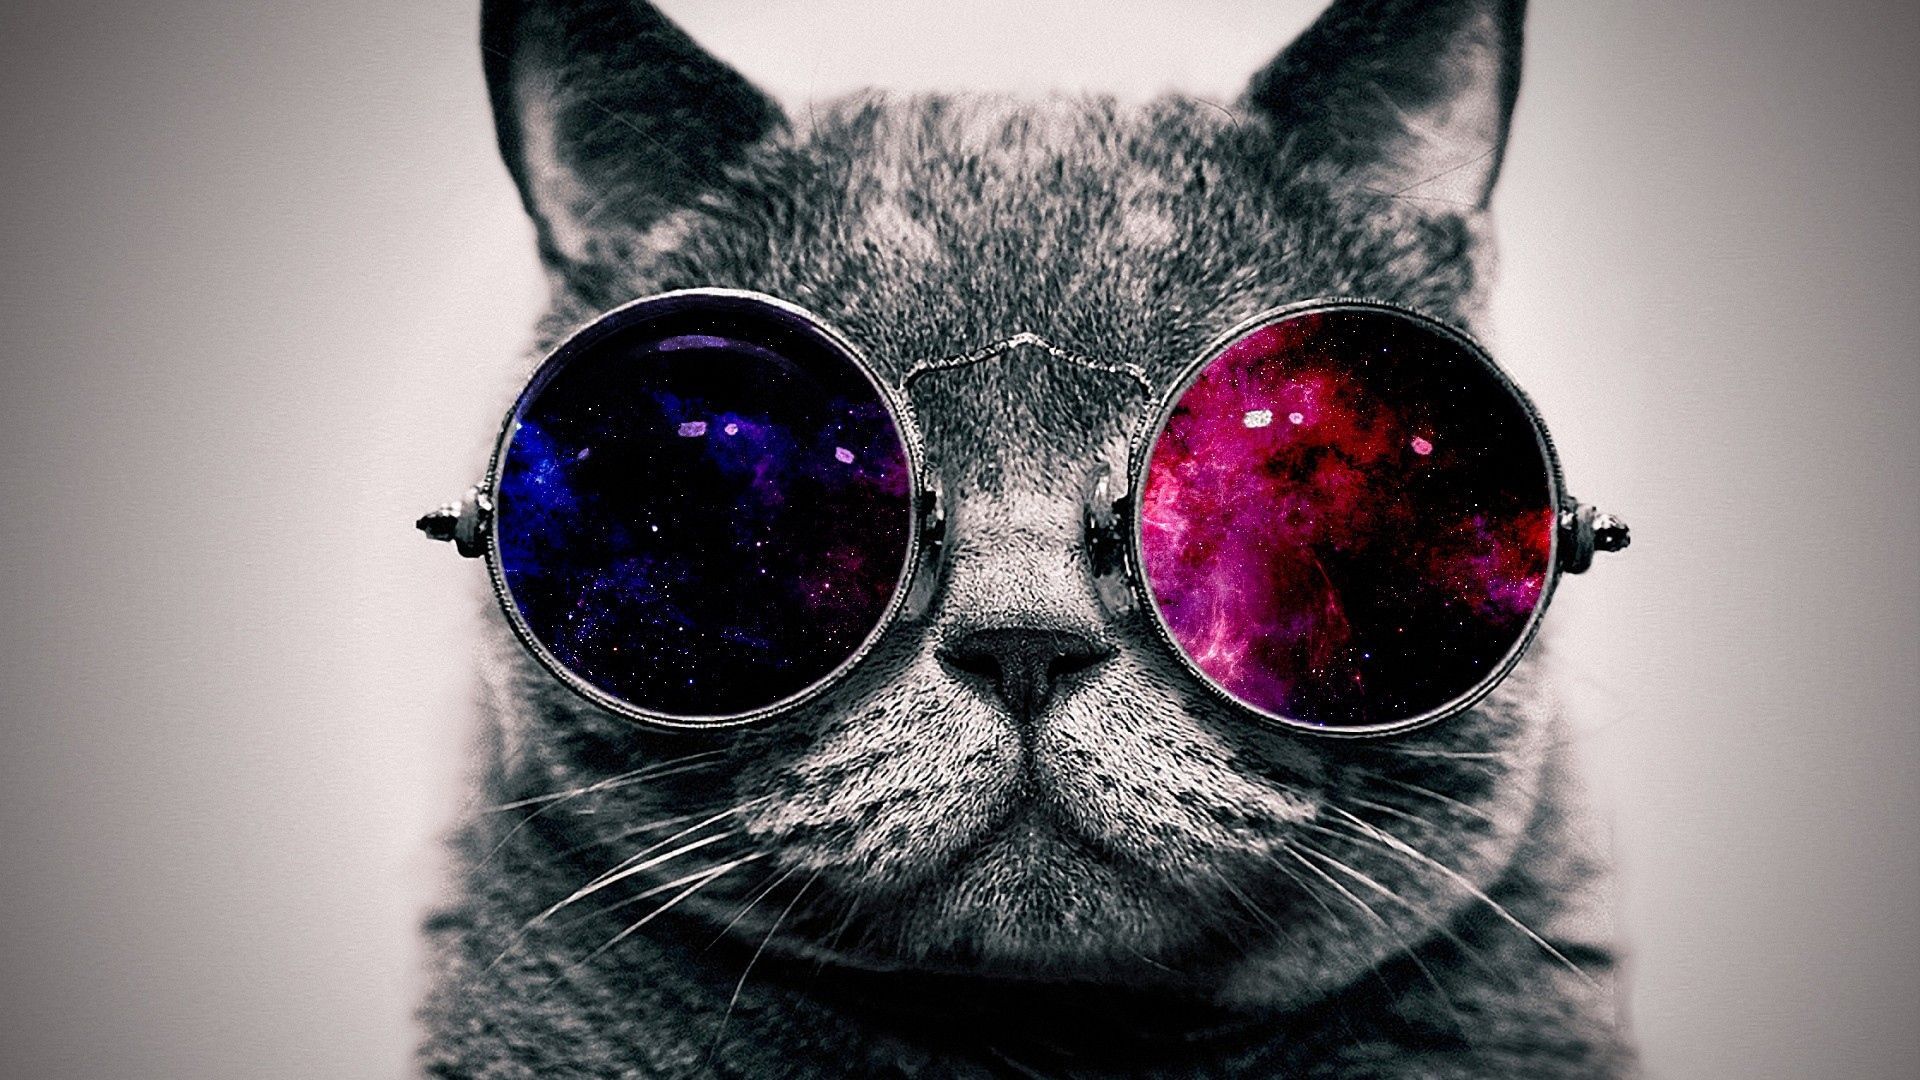 Download Wallpaper 1920x1080 Cat, Face, Glasses, Thick Full HD